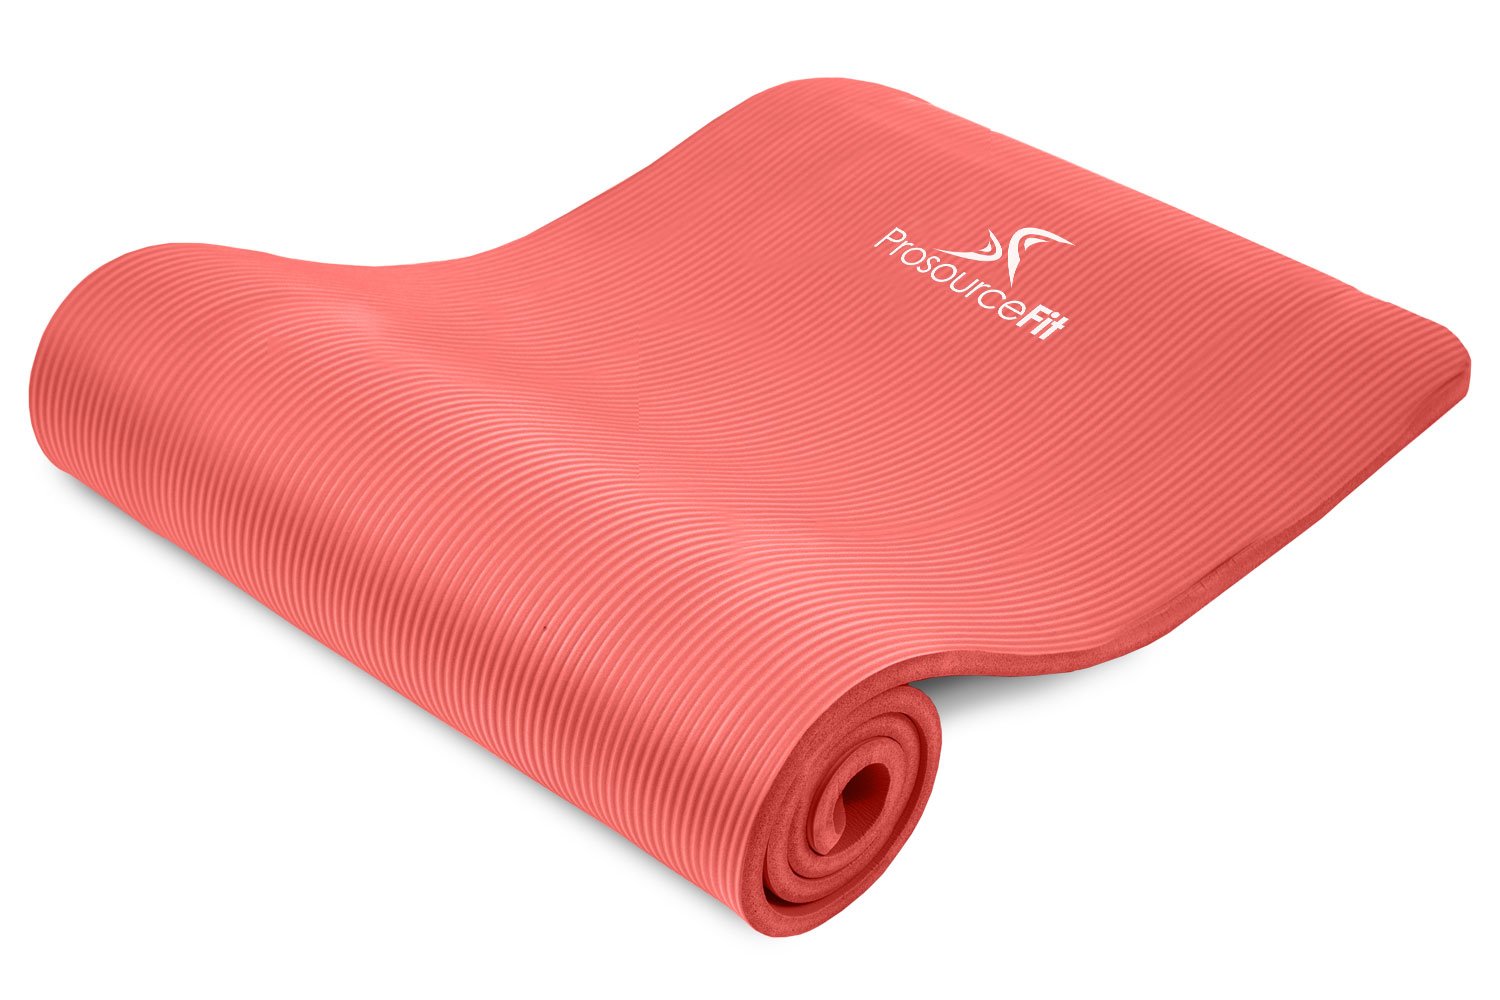 Extra Thick Yoga and Pilates Mat 1/2 inch 8 Colors The extra thick yoga and  Pilates mat uses high density foam for 1/2-inch thickness, great for use on  hard floors. The extra